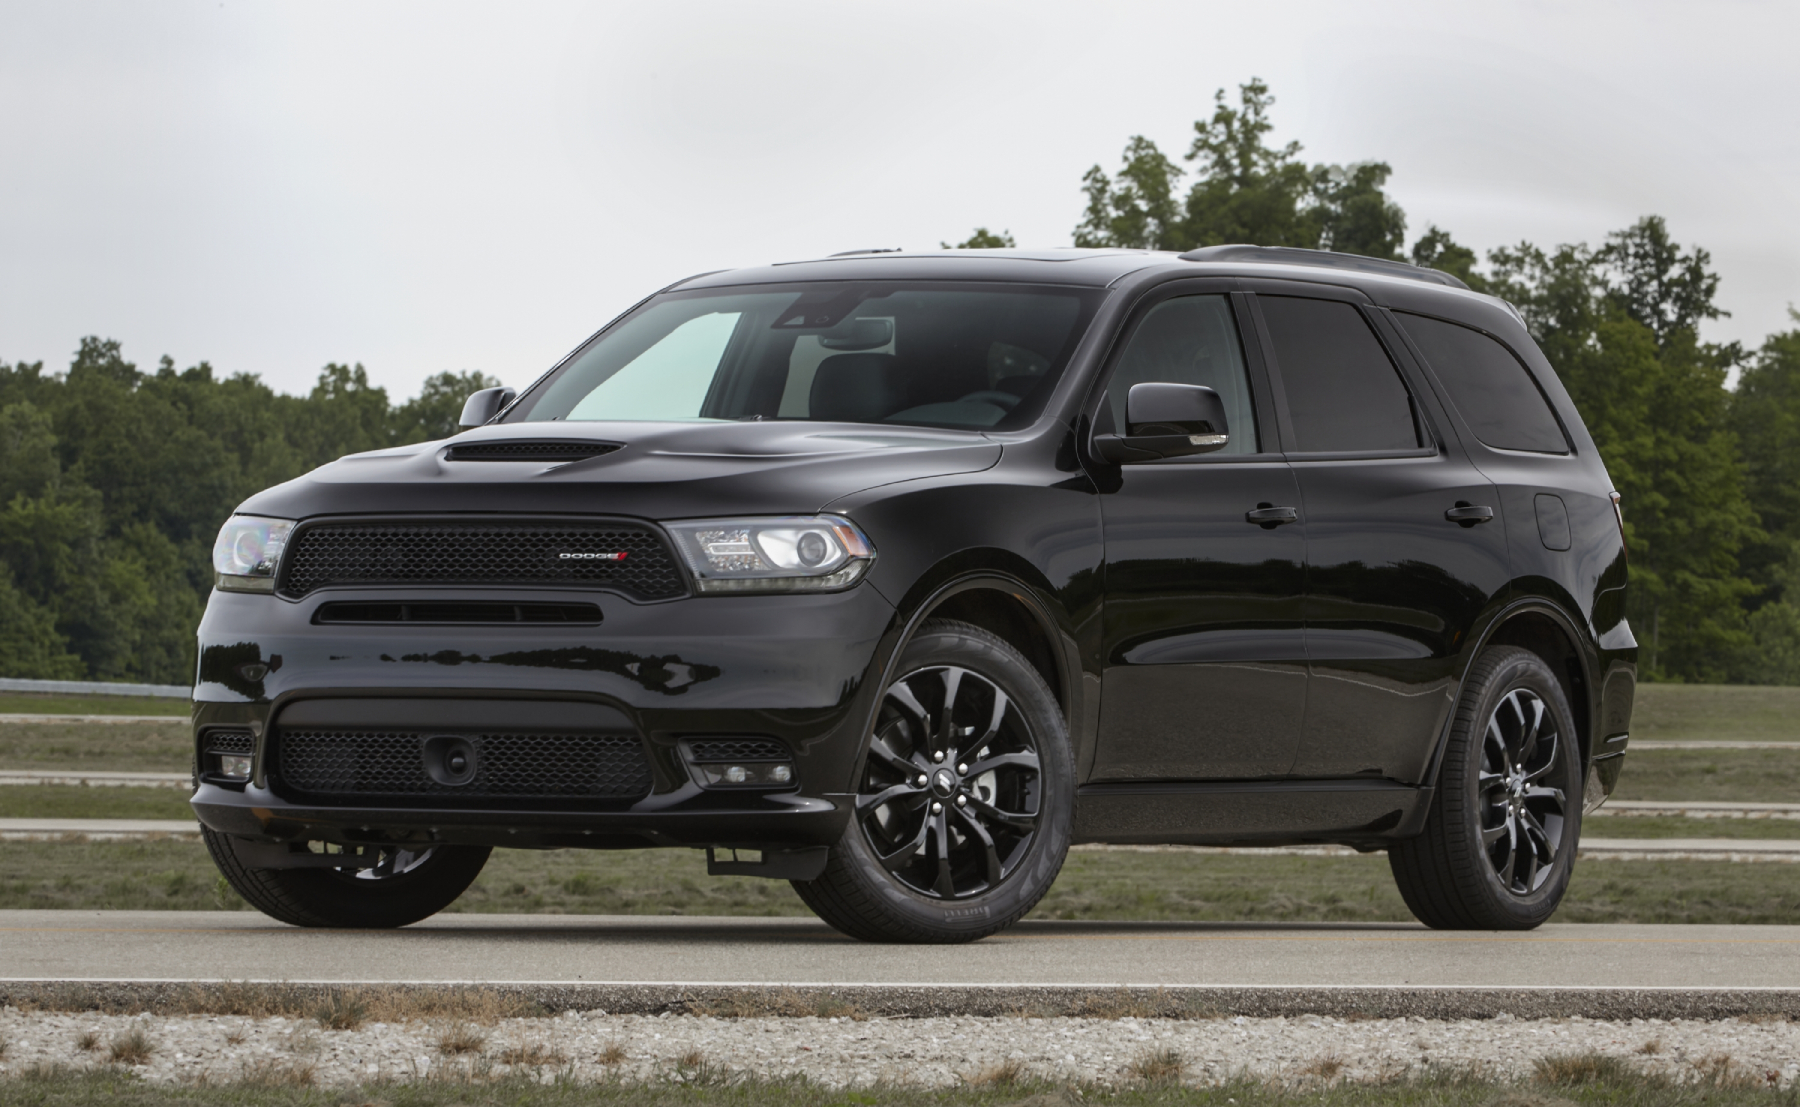 2020 Dodge Durango parked outside with trees in the background